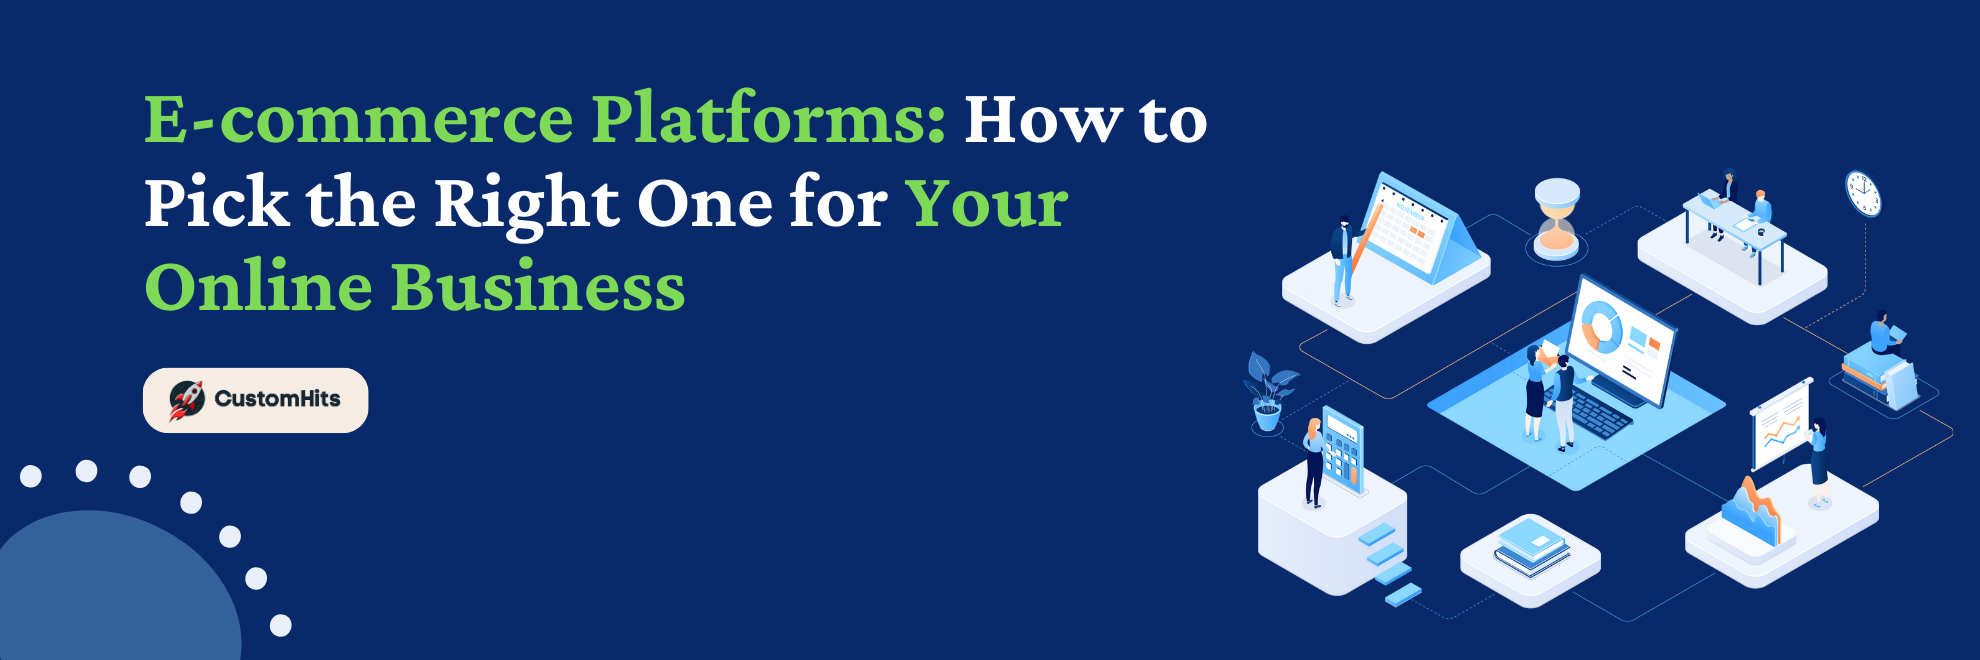 E-commerce Platforms: How to Pick the Right One for Your Online Business